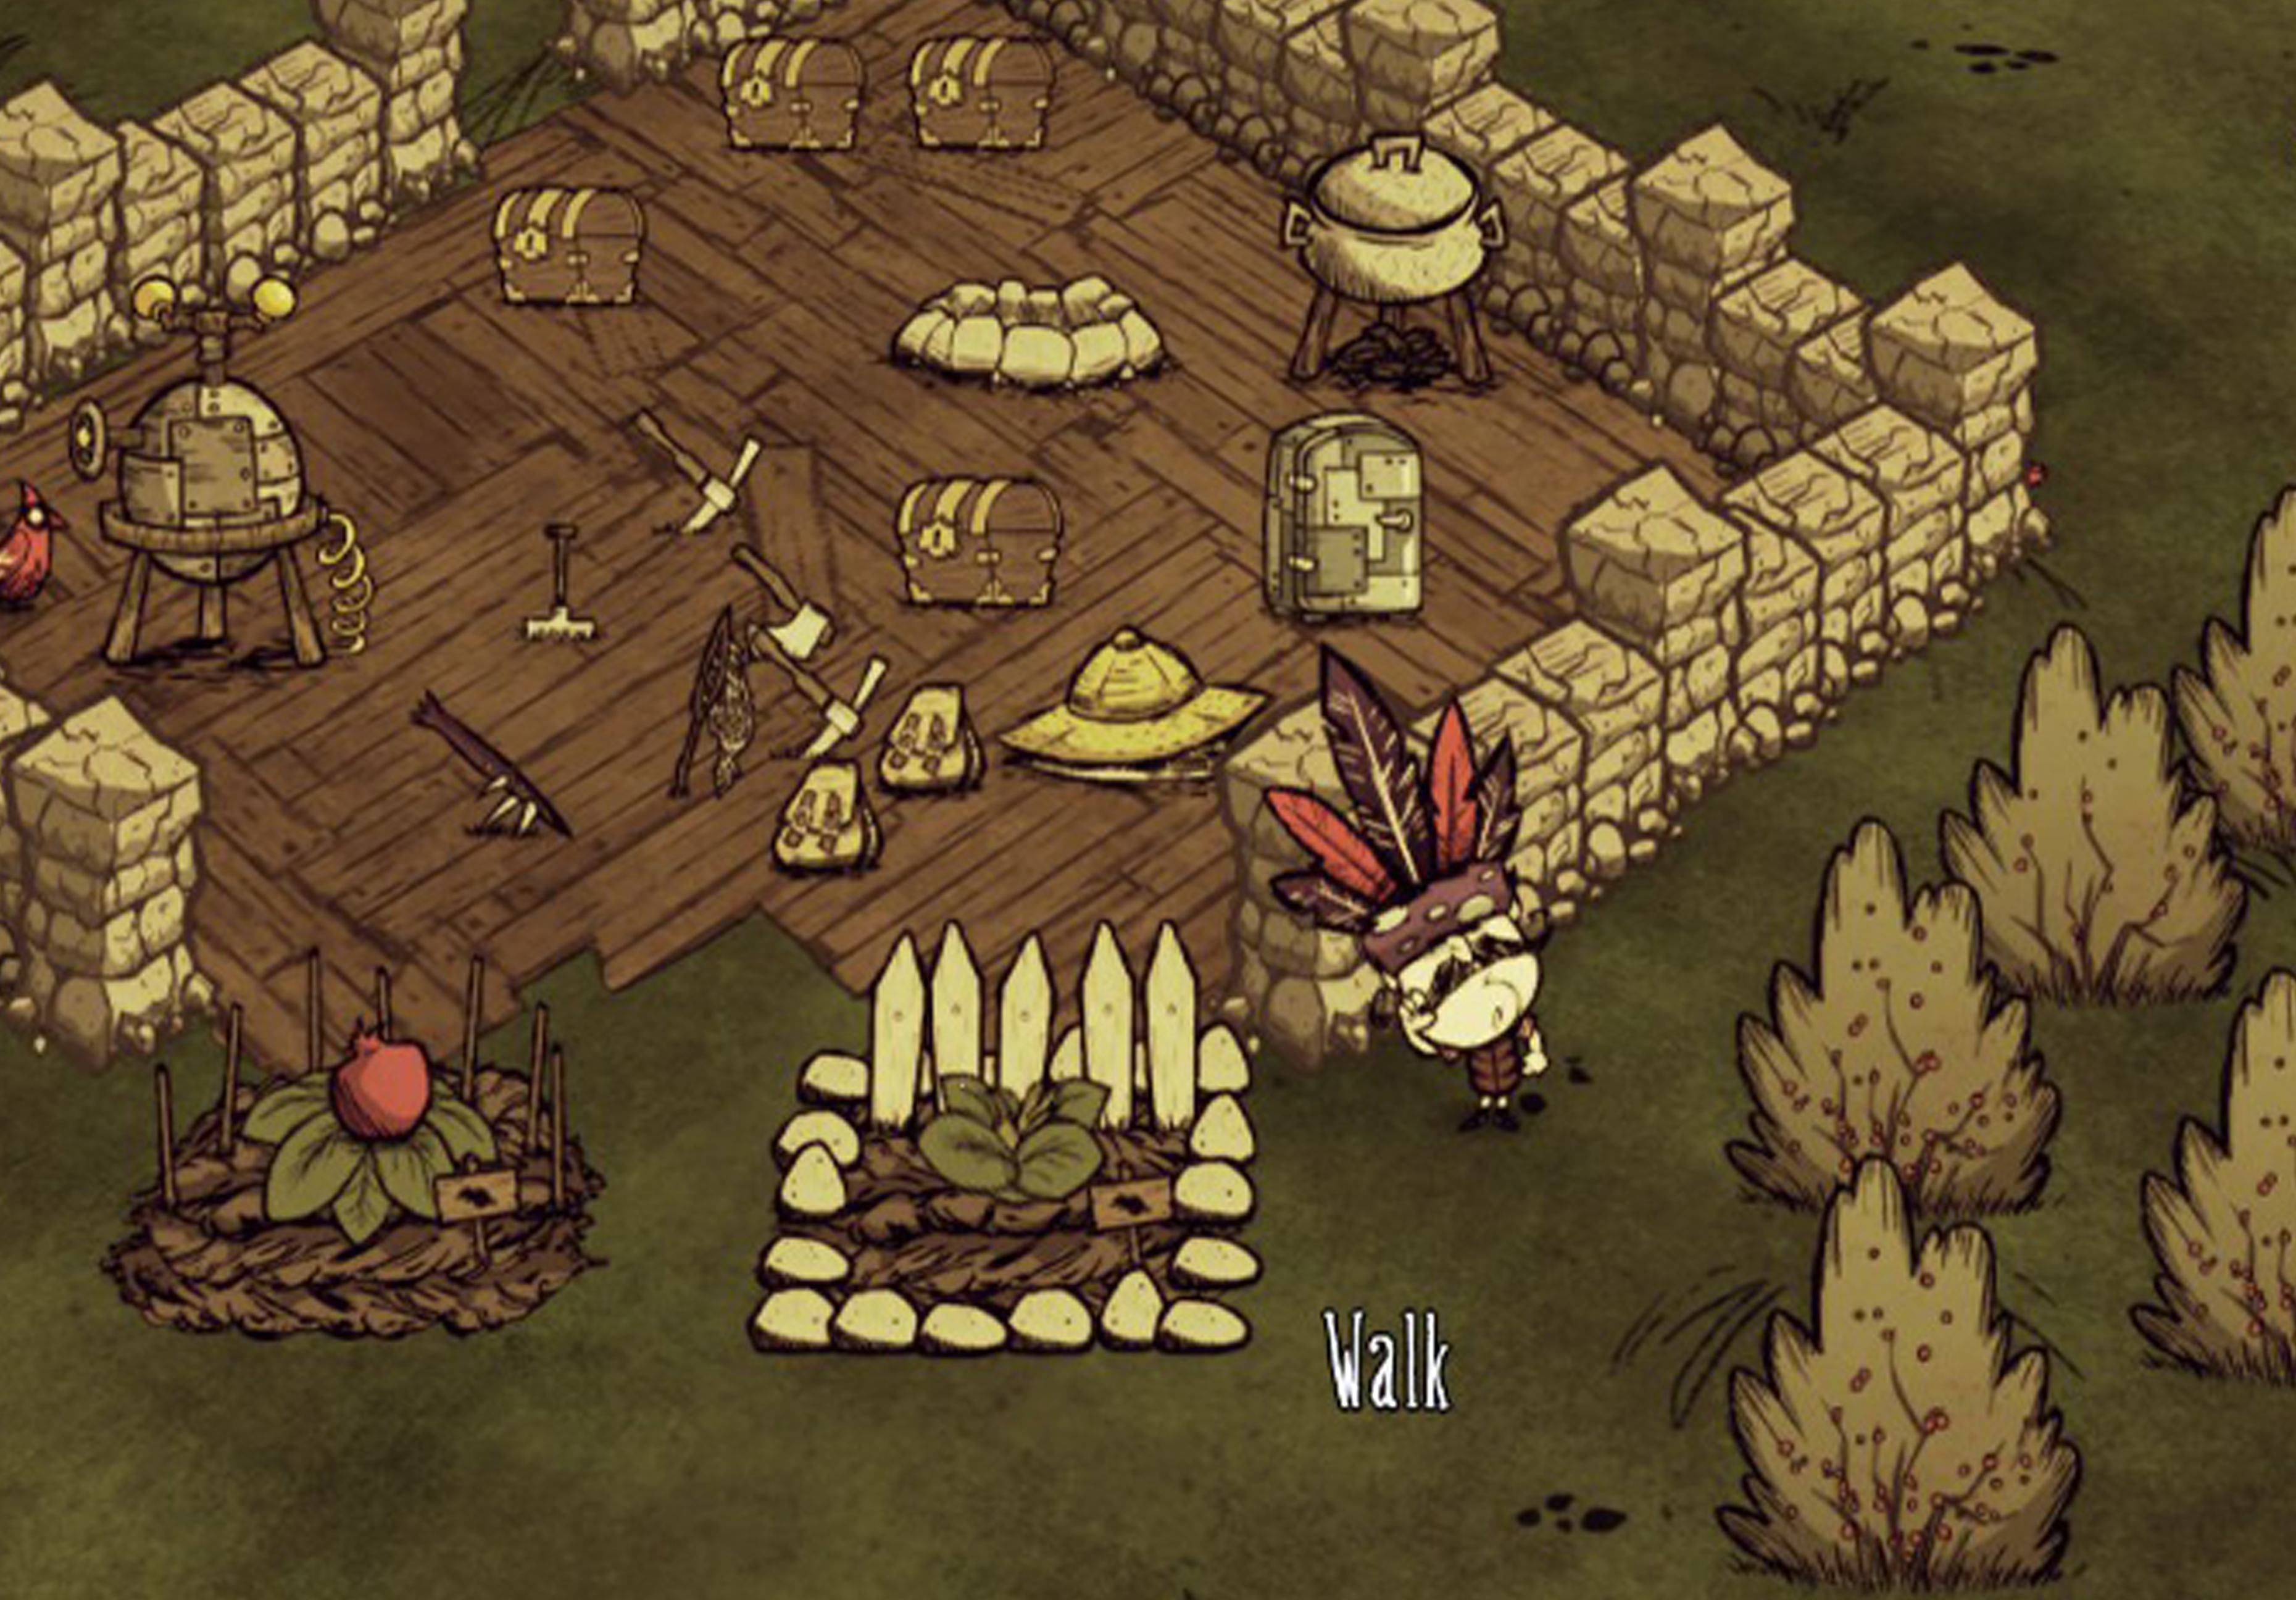 Don t starve основы. Донт старв база. Don't Starve together база. Красивая база в донт старв. Донт старв база для новичков.